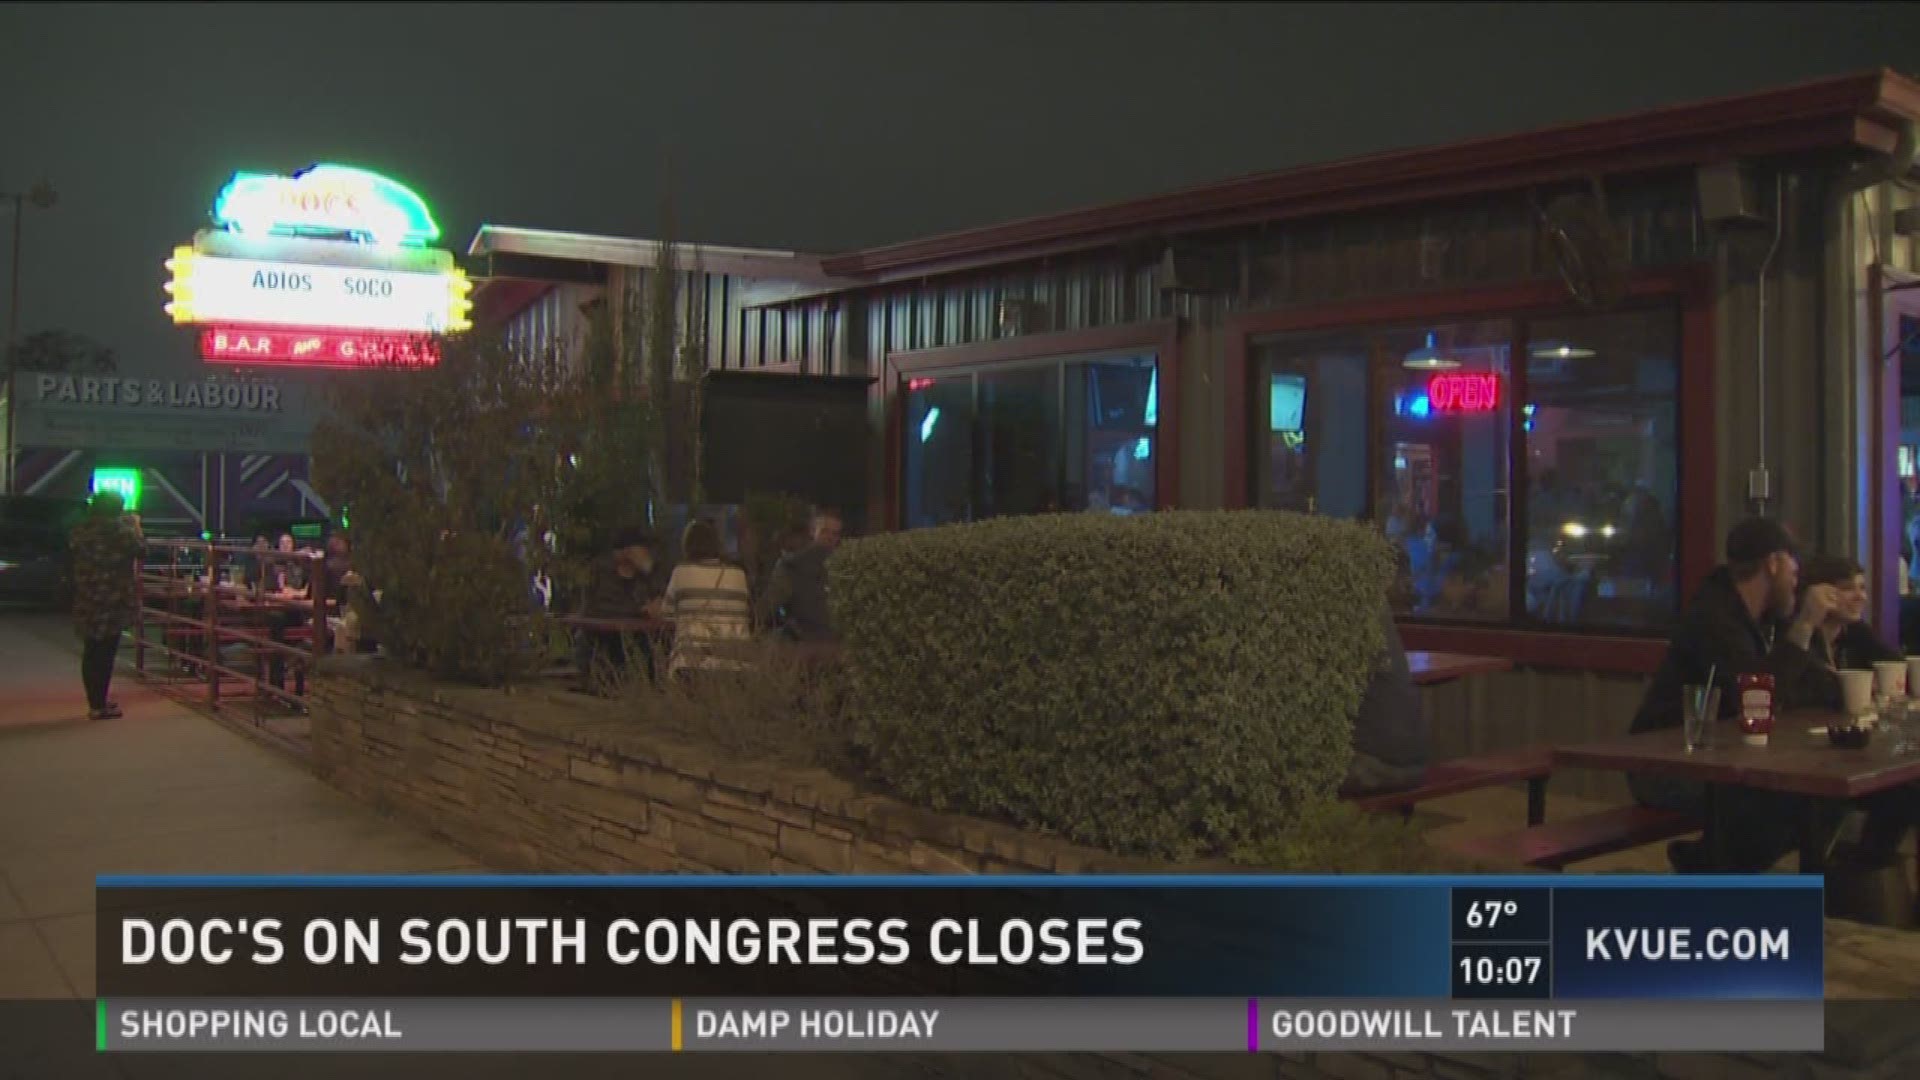 The South Congress staple is closing after 11 years.